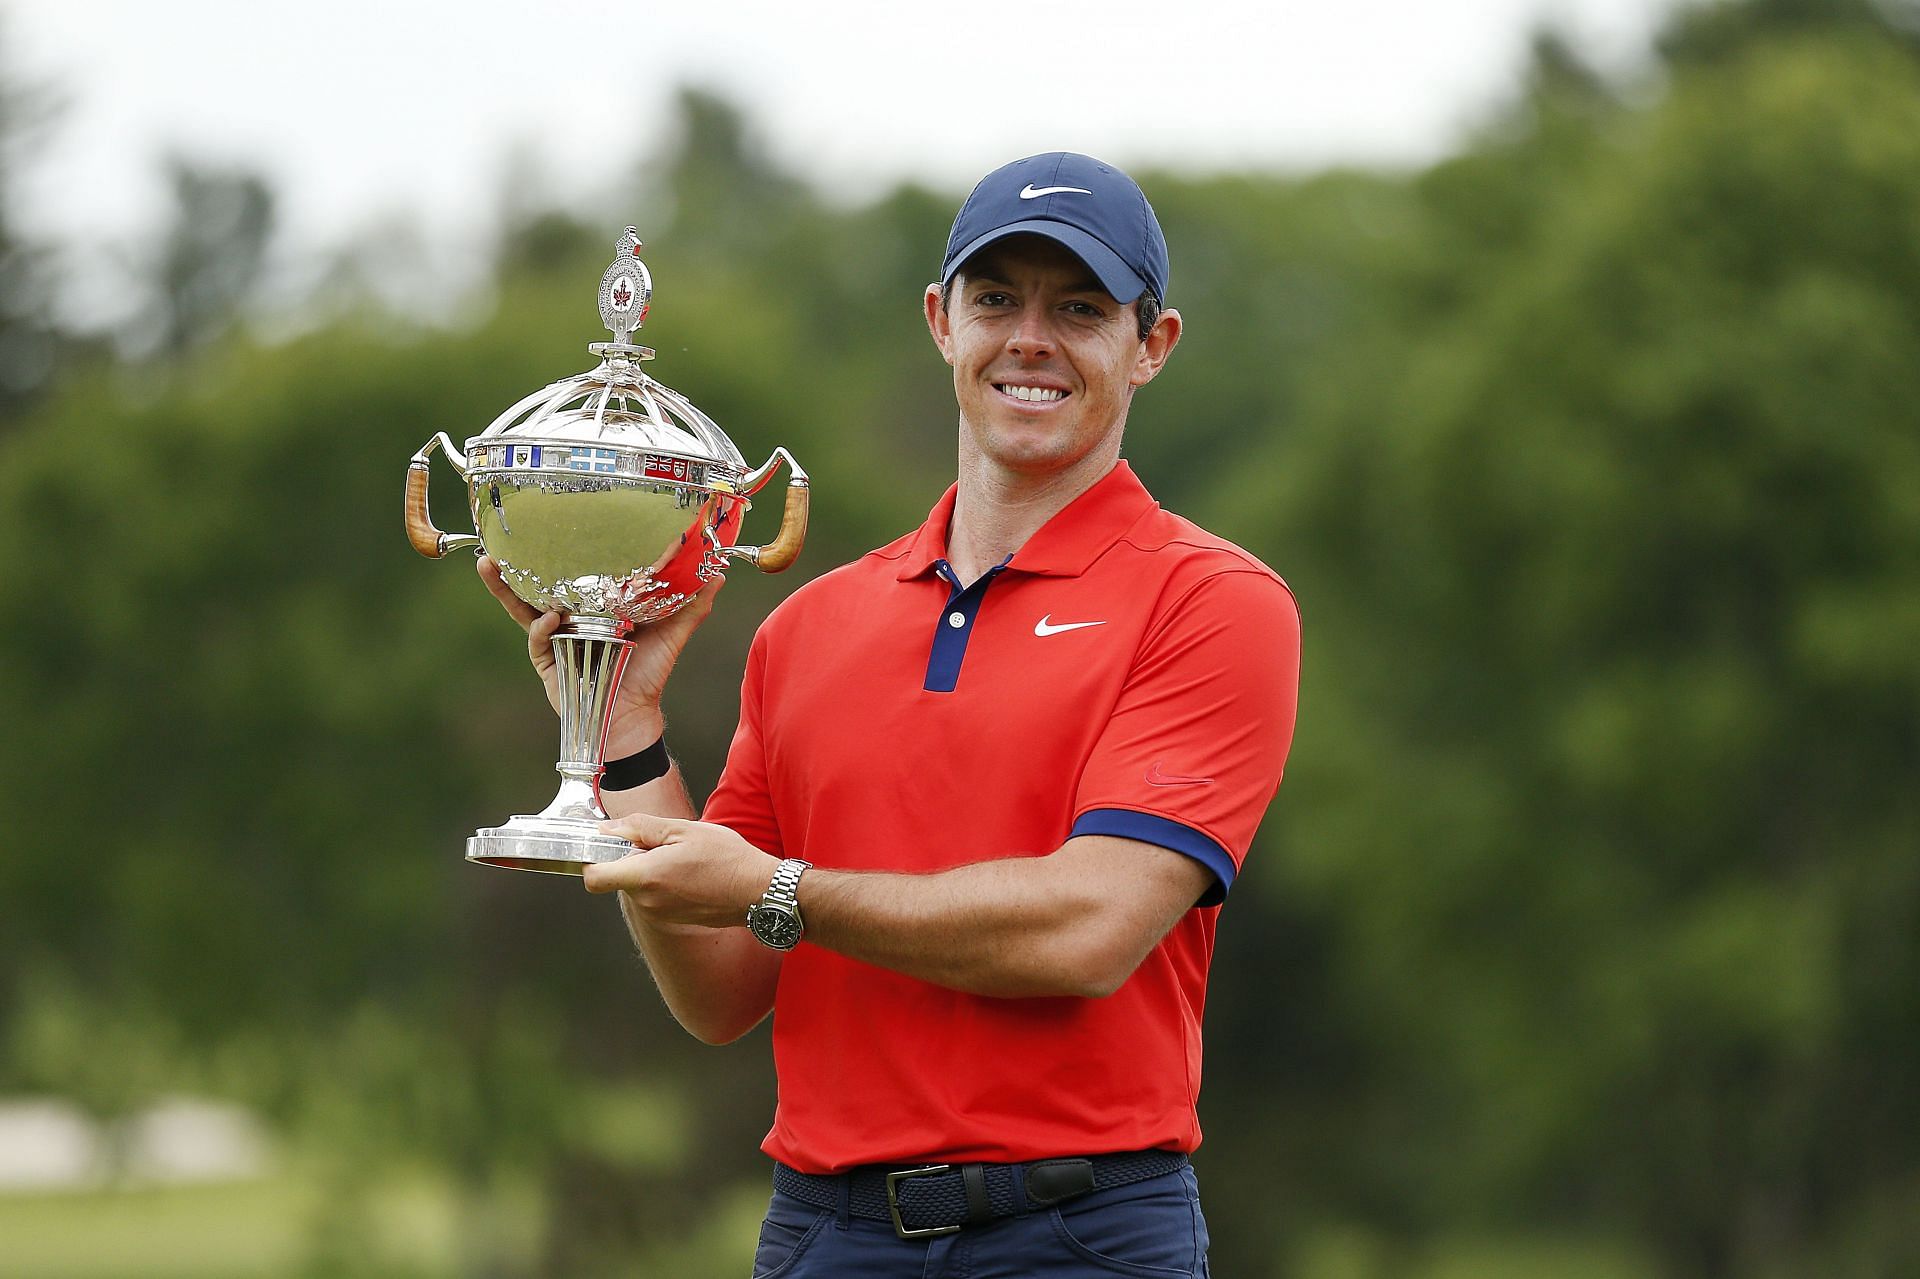 Rory McIlroy has won the RBC Canadian Open twice